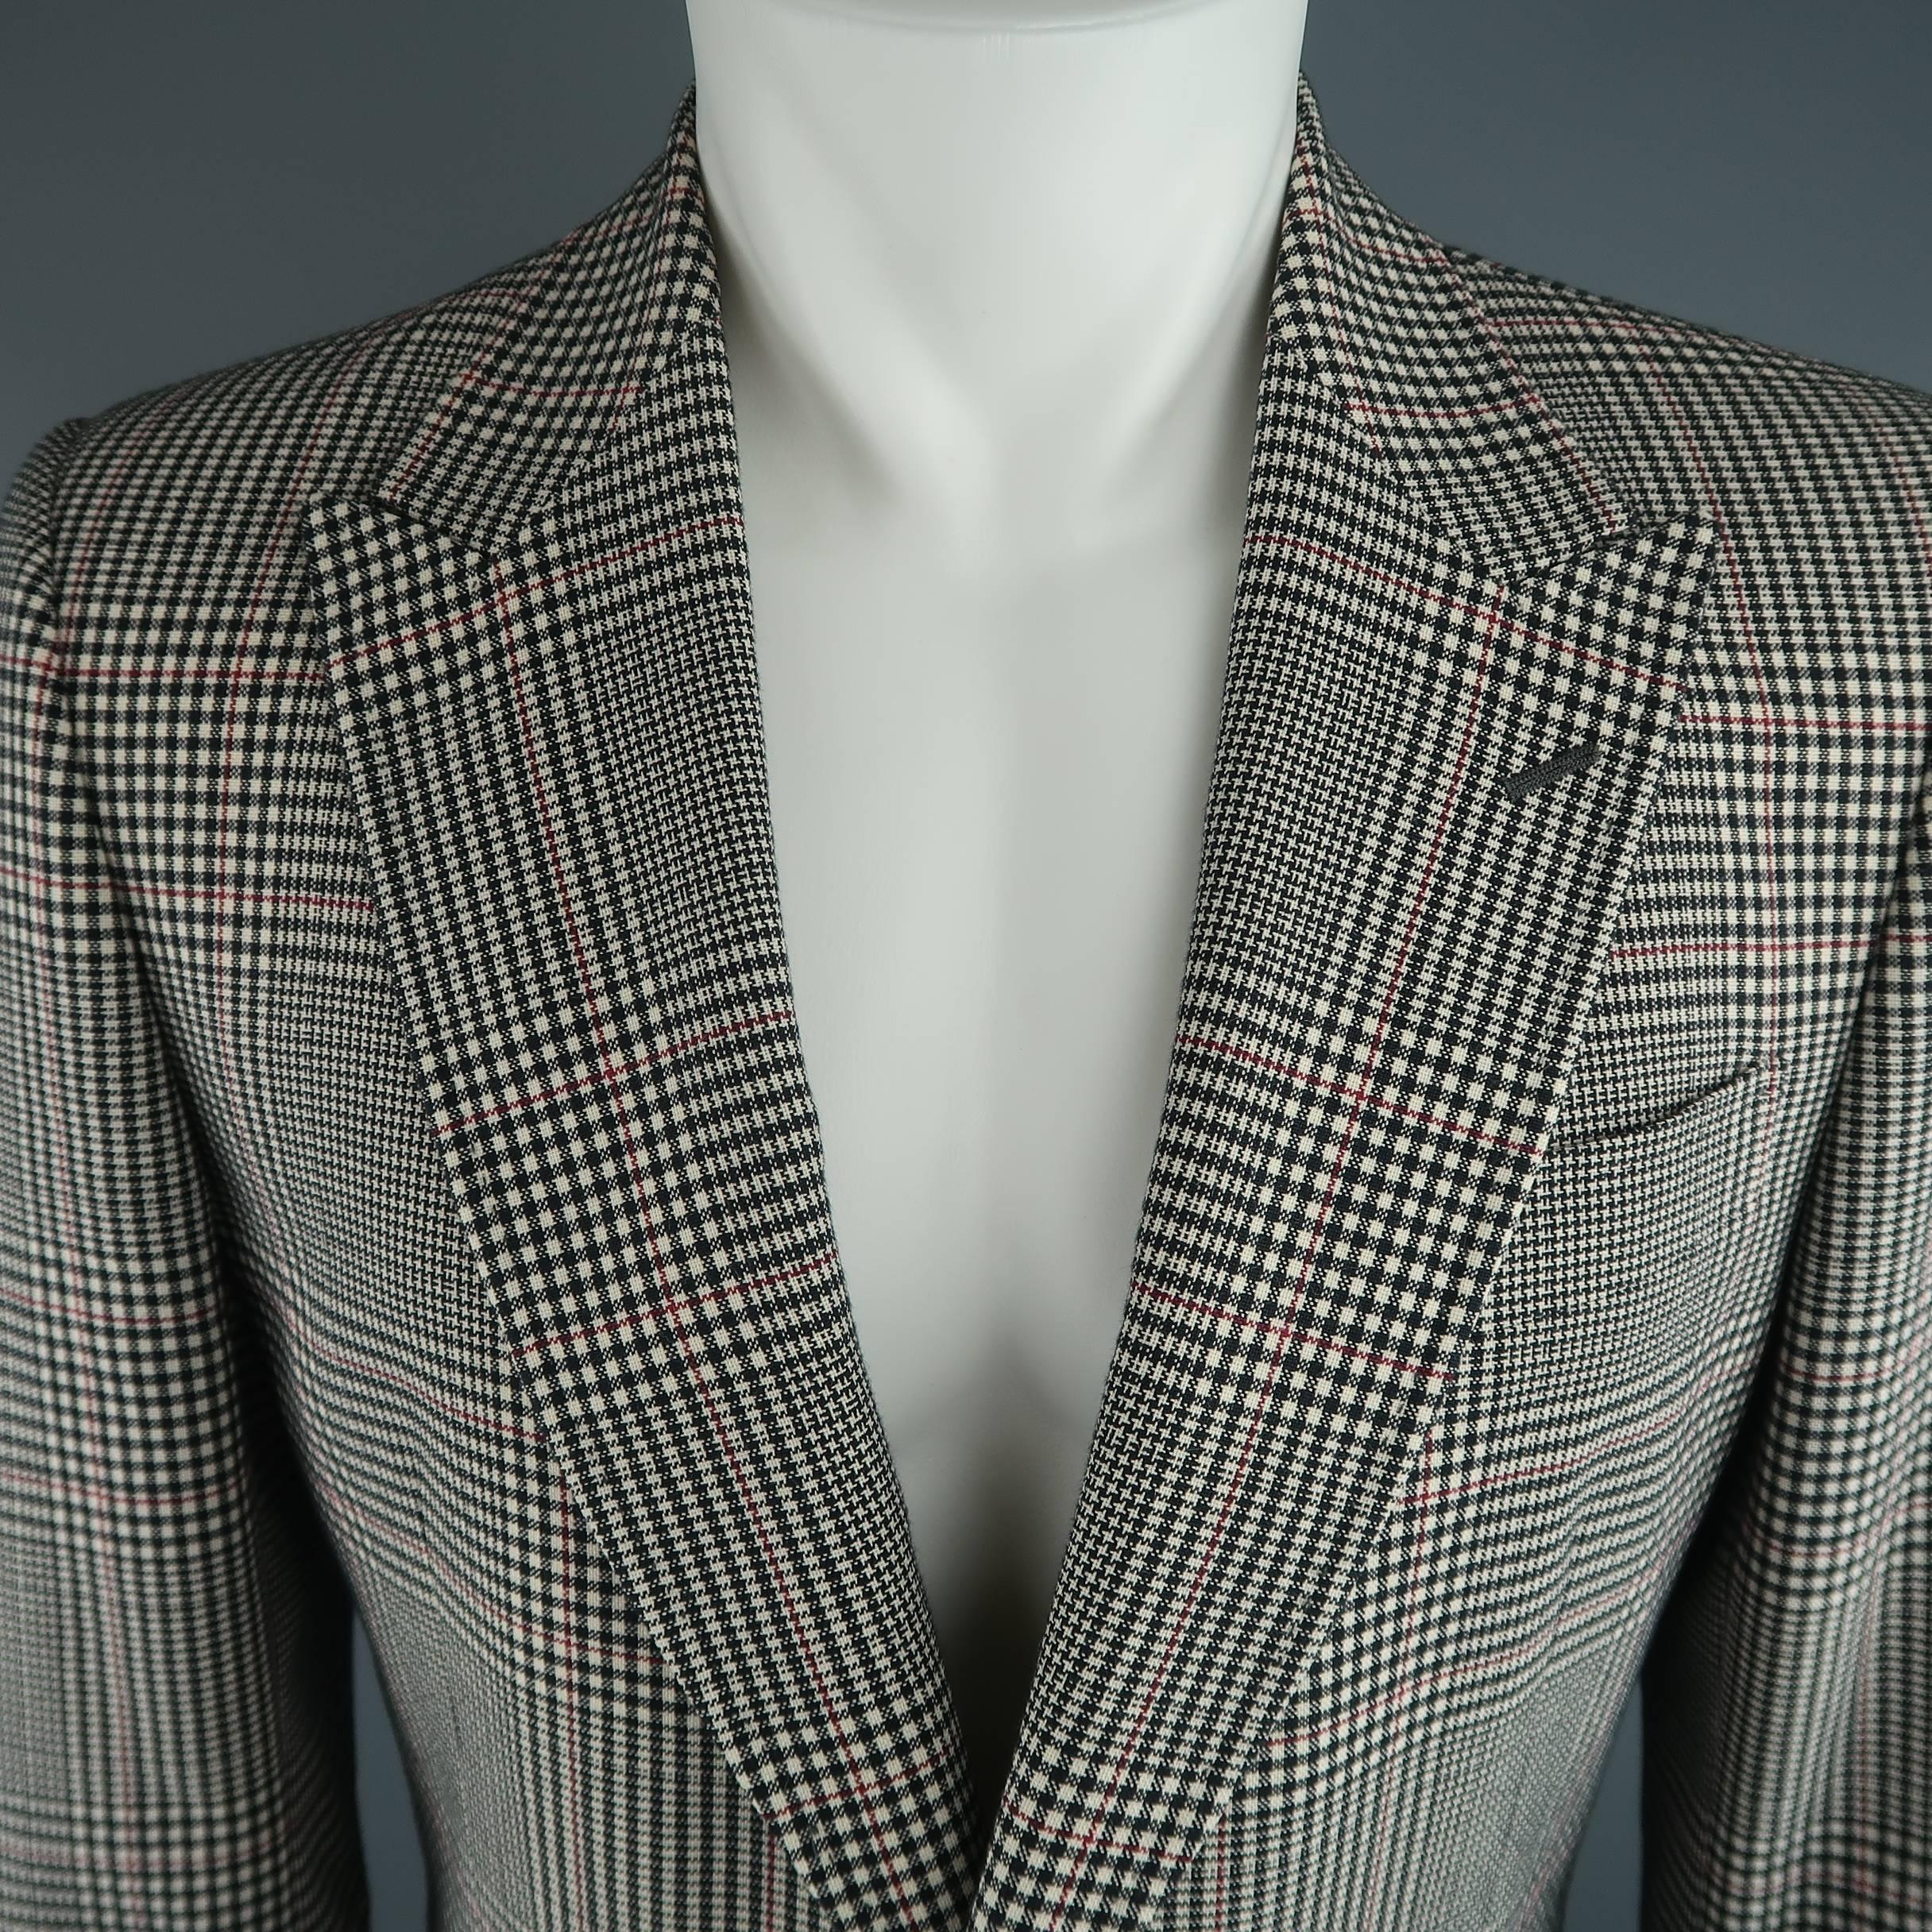 Two button GUCCI sport coat comes in an off white and black glenplaid print mohair cotton blend fabric with red stripes throughout and features a pointed peak lapel, slanted flap pockets, faux button cuffs, and double vented back. Half Lined in red